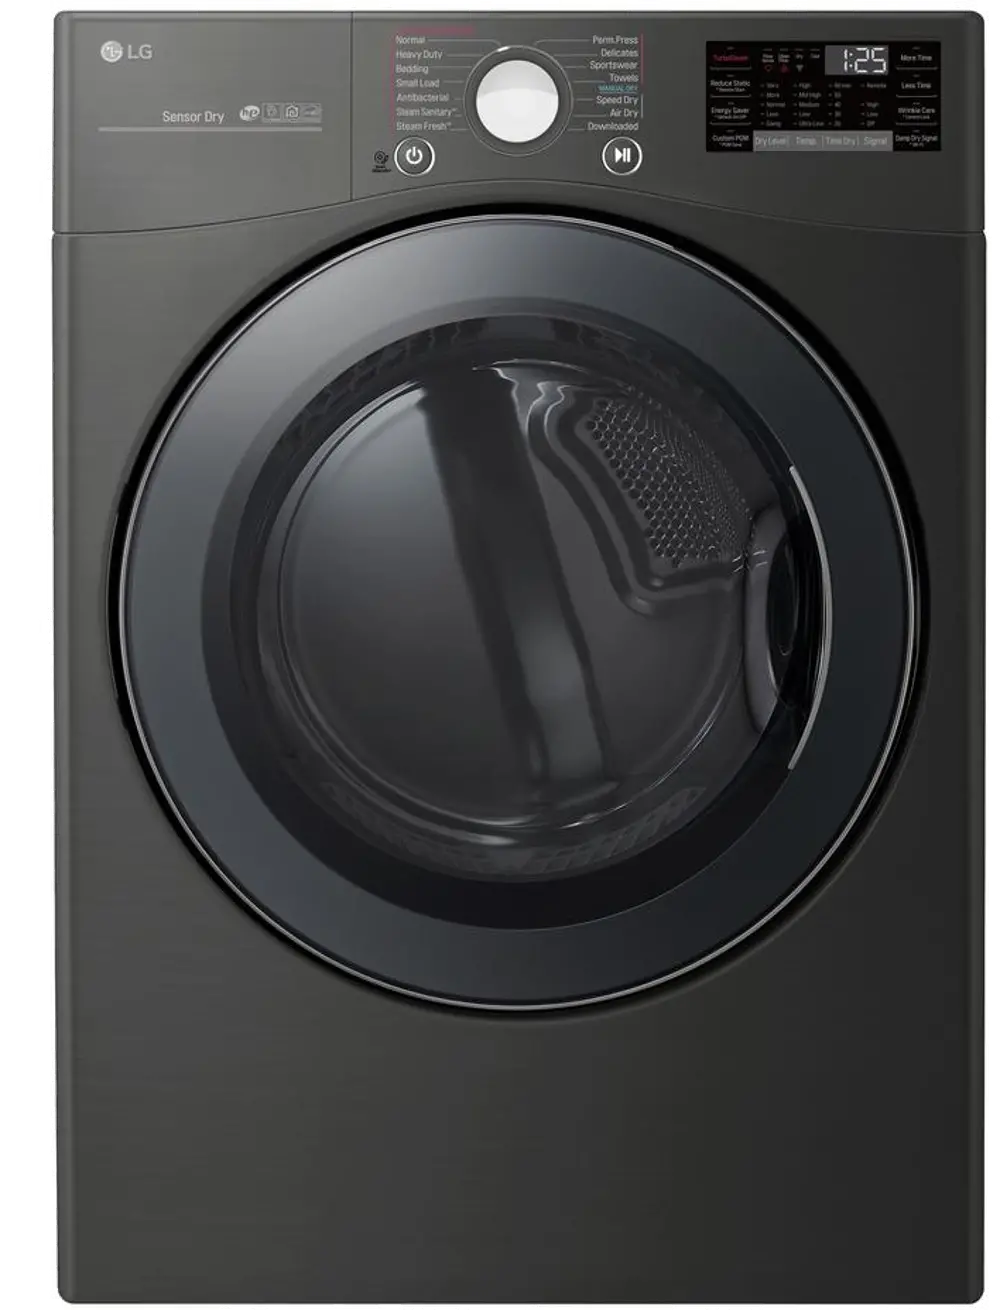 DLEX3900B LG Smart WiFi Enabled Electric Dryer with TurboSteam - 7.4 cu. ft. Black Steel-1